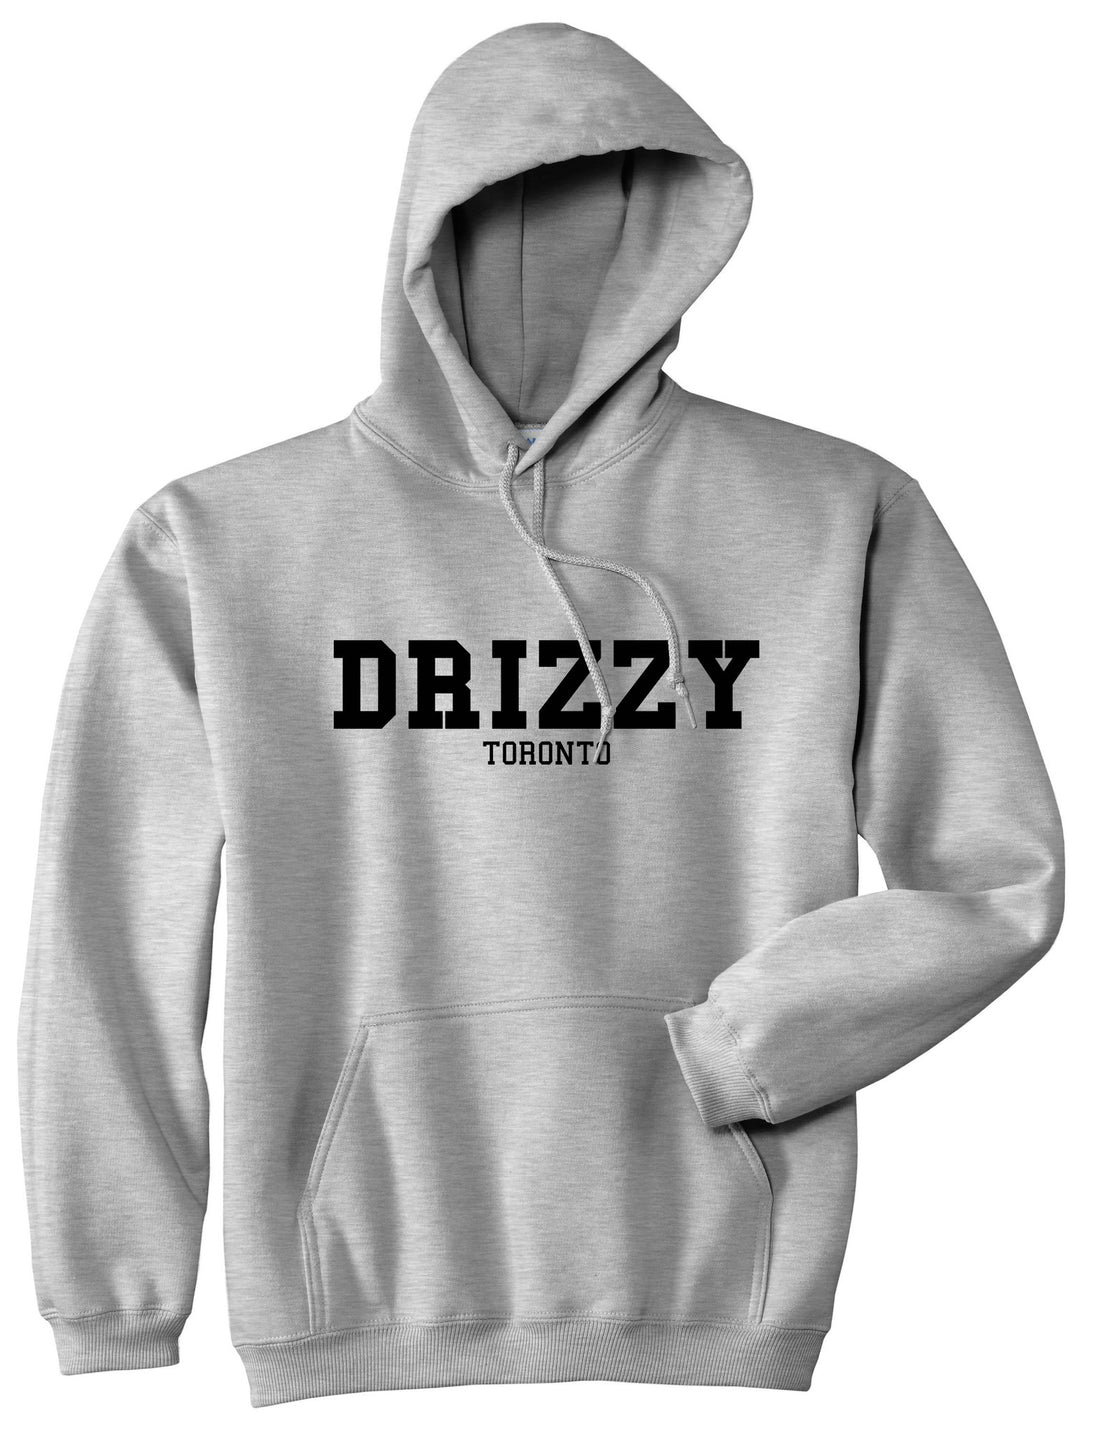 Drizzy Toronto Canada Pullover Hoodie Hoody in Grey by Kings Of NY